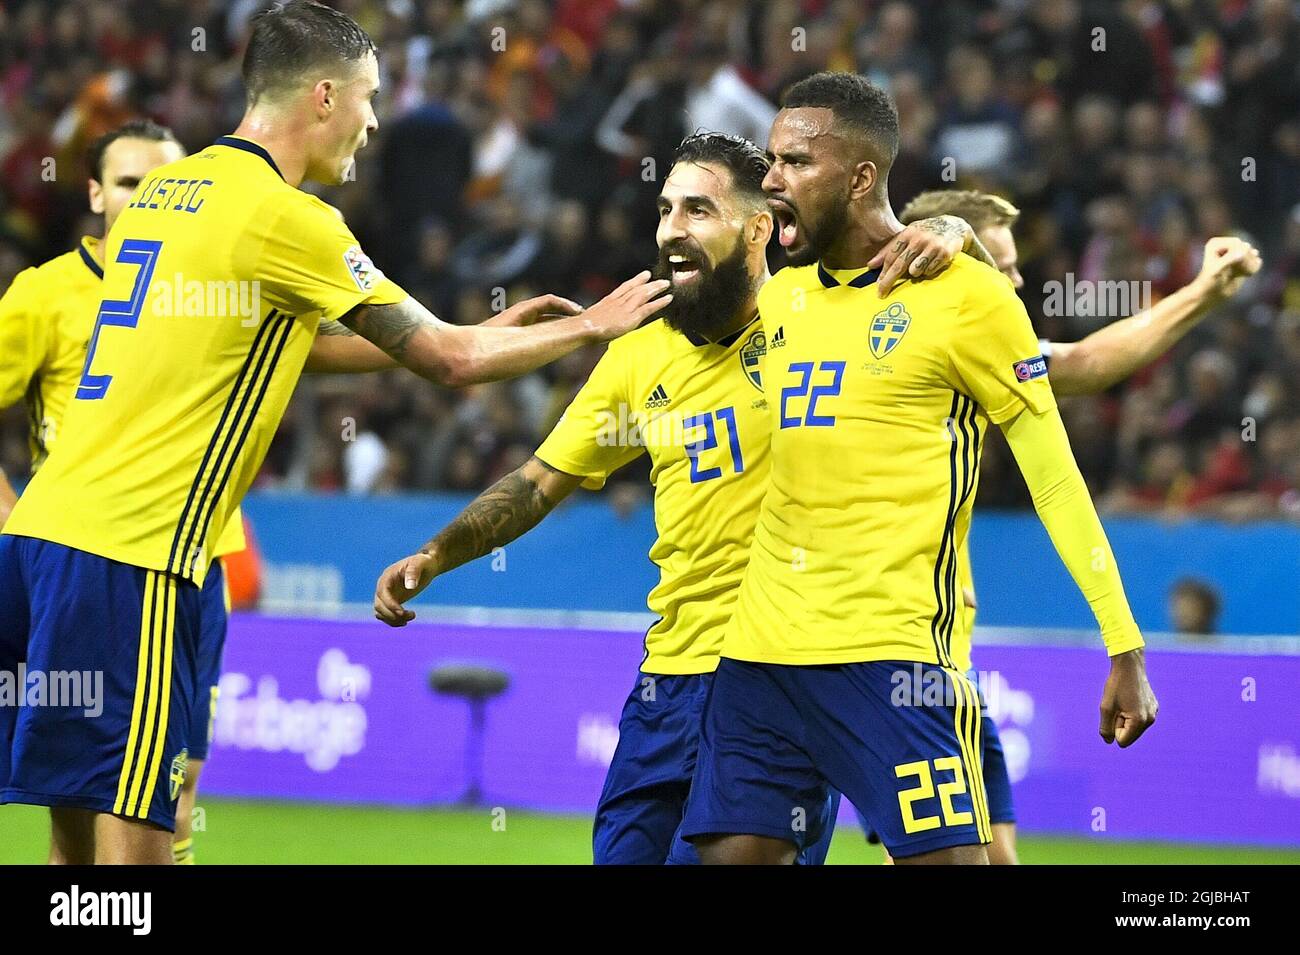 Sweden's Isaac Kiese Thelin (R) celebrates with Mikael Lustig (L) and Jimmy Durmaz after scoring the opening goal during the UEFA Nations League, league B, group 2, soccer match between Sweden and Turkey at Friends Arena in Solna, Stockholm, Sweden, on Sept. 10, 2018. Photo: Claudio Bresciani / TT / code 10090  Stock Photo